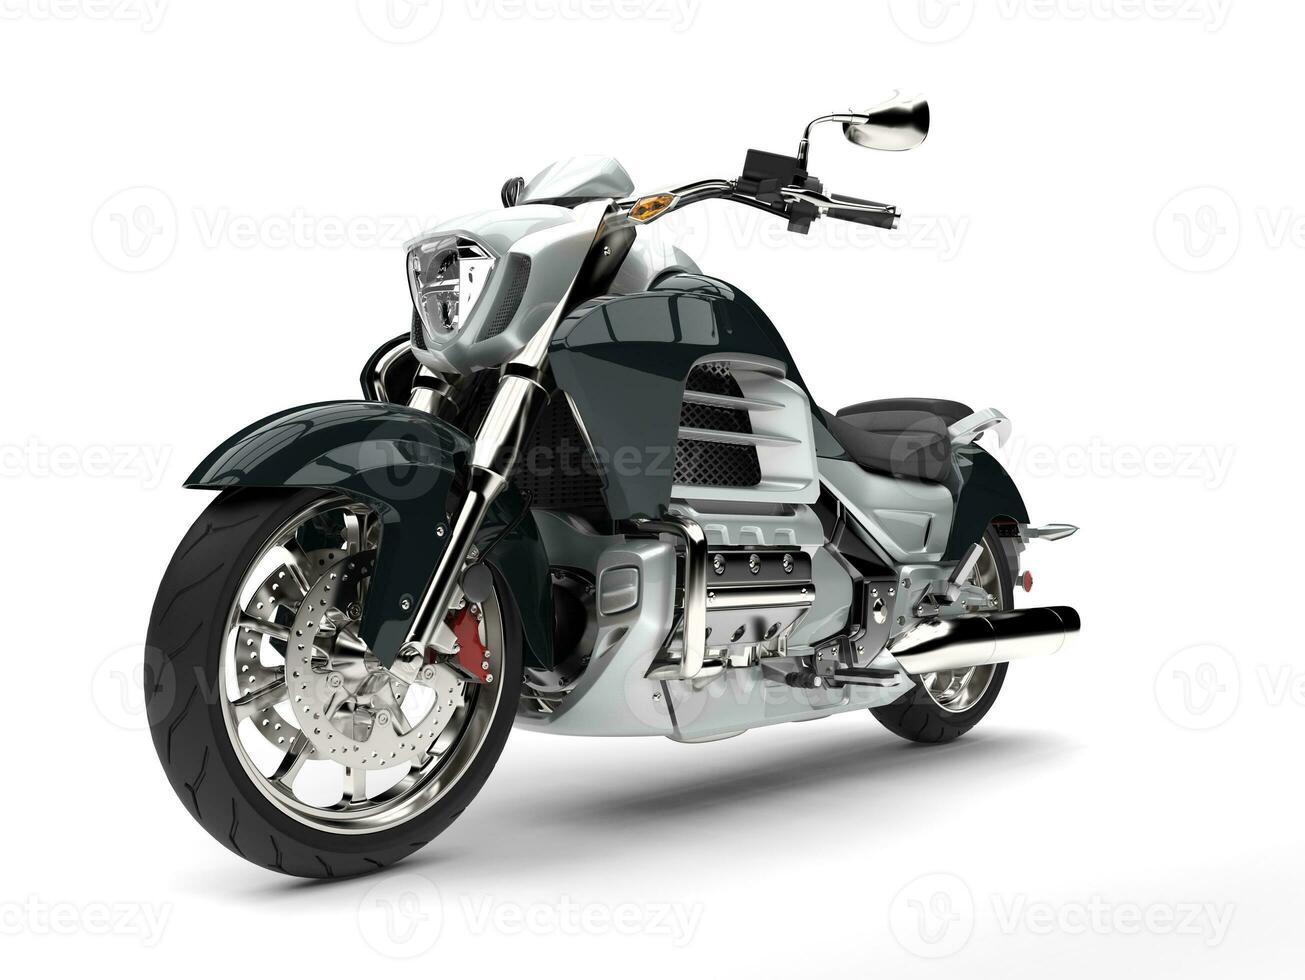 Super silver modern powerful motorcycle - front view closeup shot photo